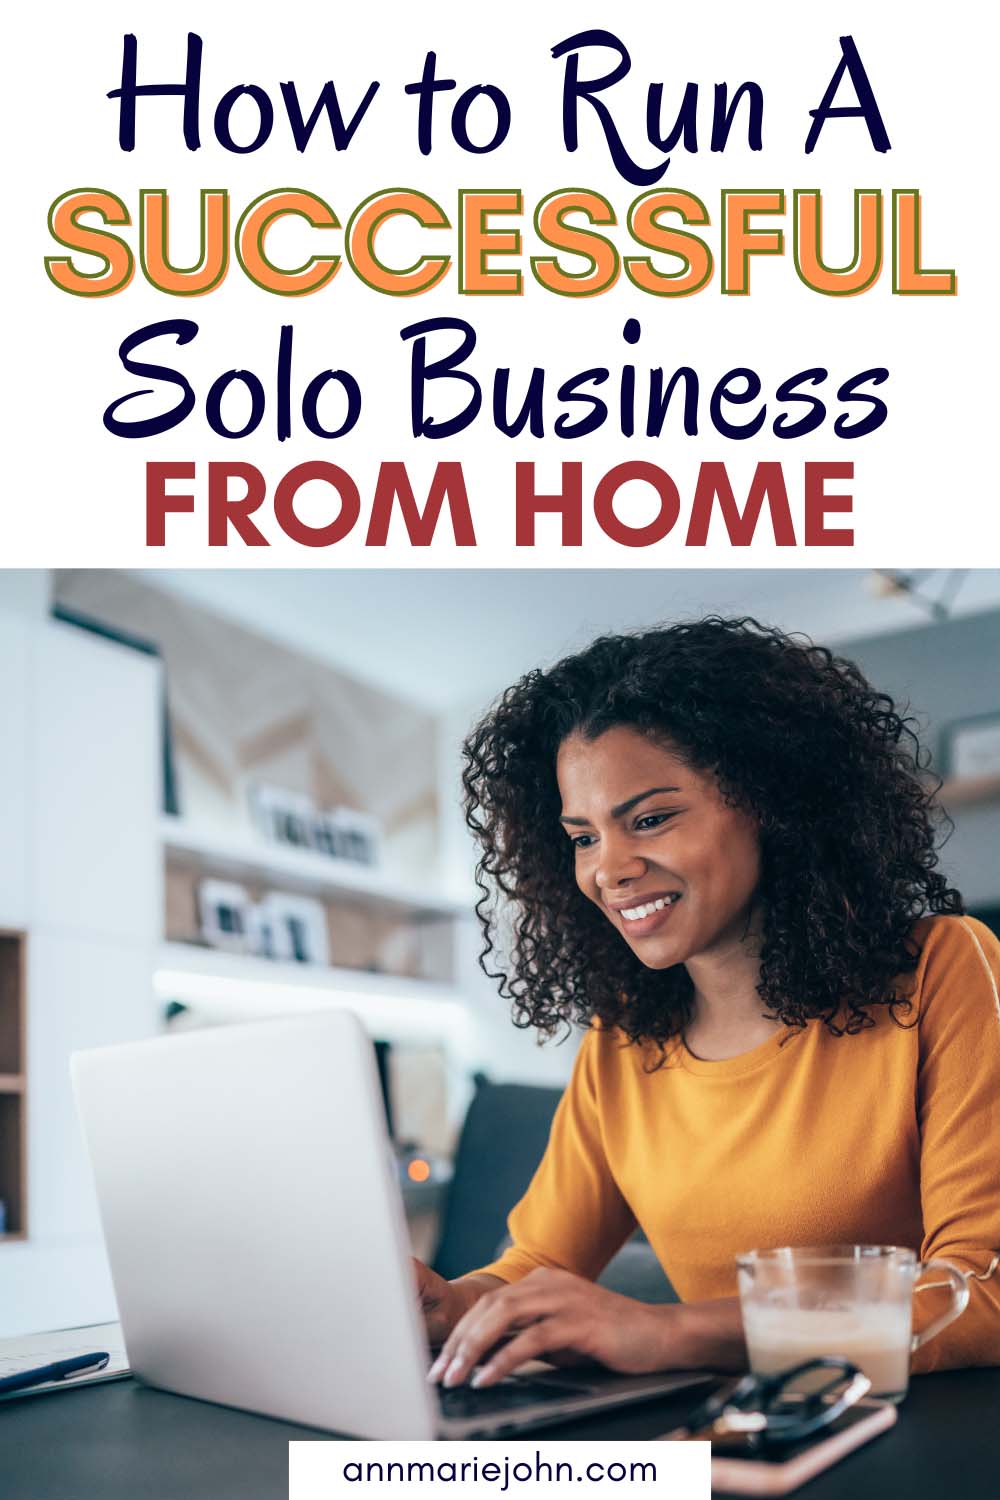 How to Run a Successful Solo Business From Home